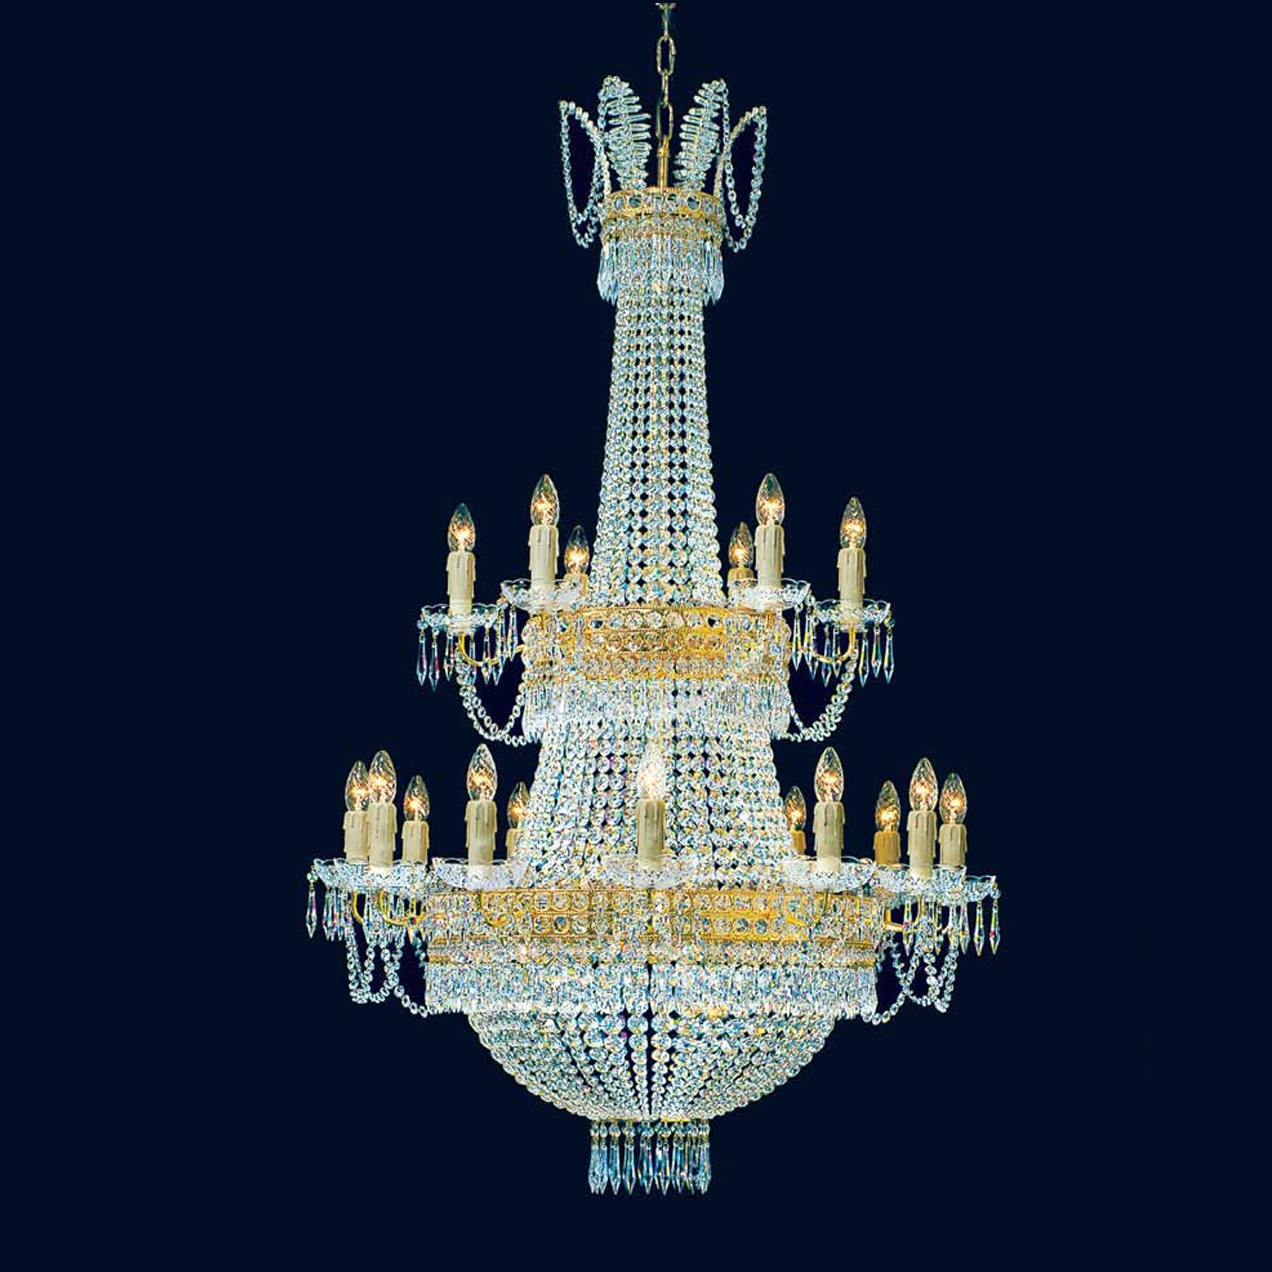 Two layers candle crytal empire chandelier